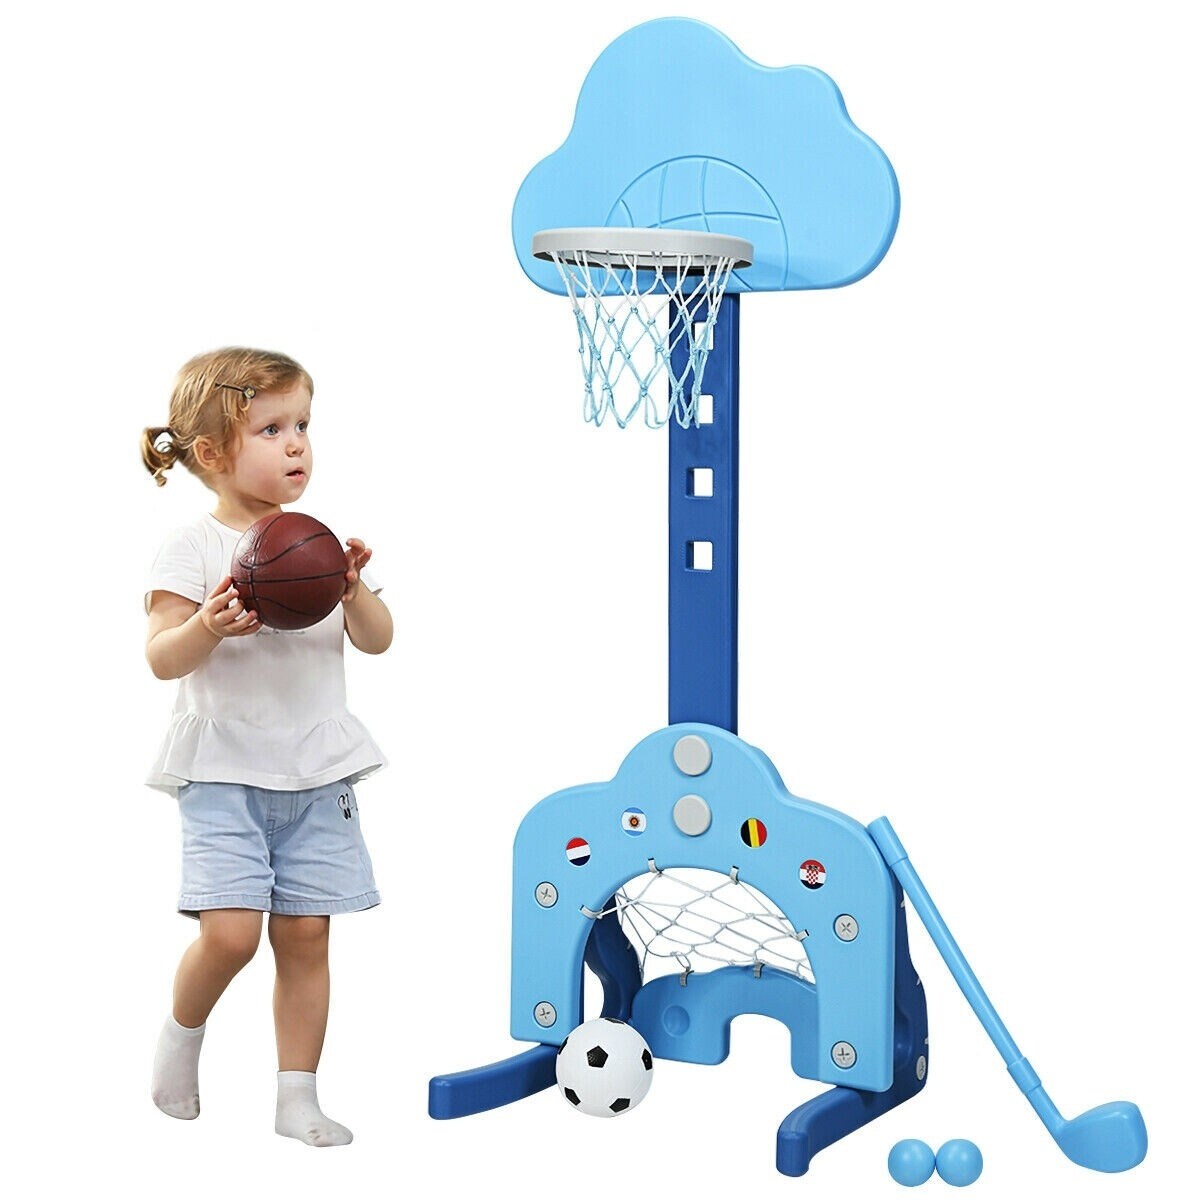 3 in 1 HIGH QUALITY CAR SHAPE KIDS BASKETBALL STAND HOCKEY AND FOOTBALL Blue 